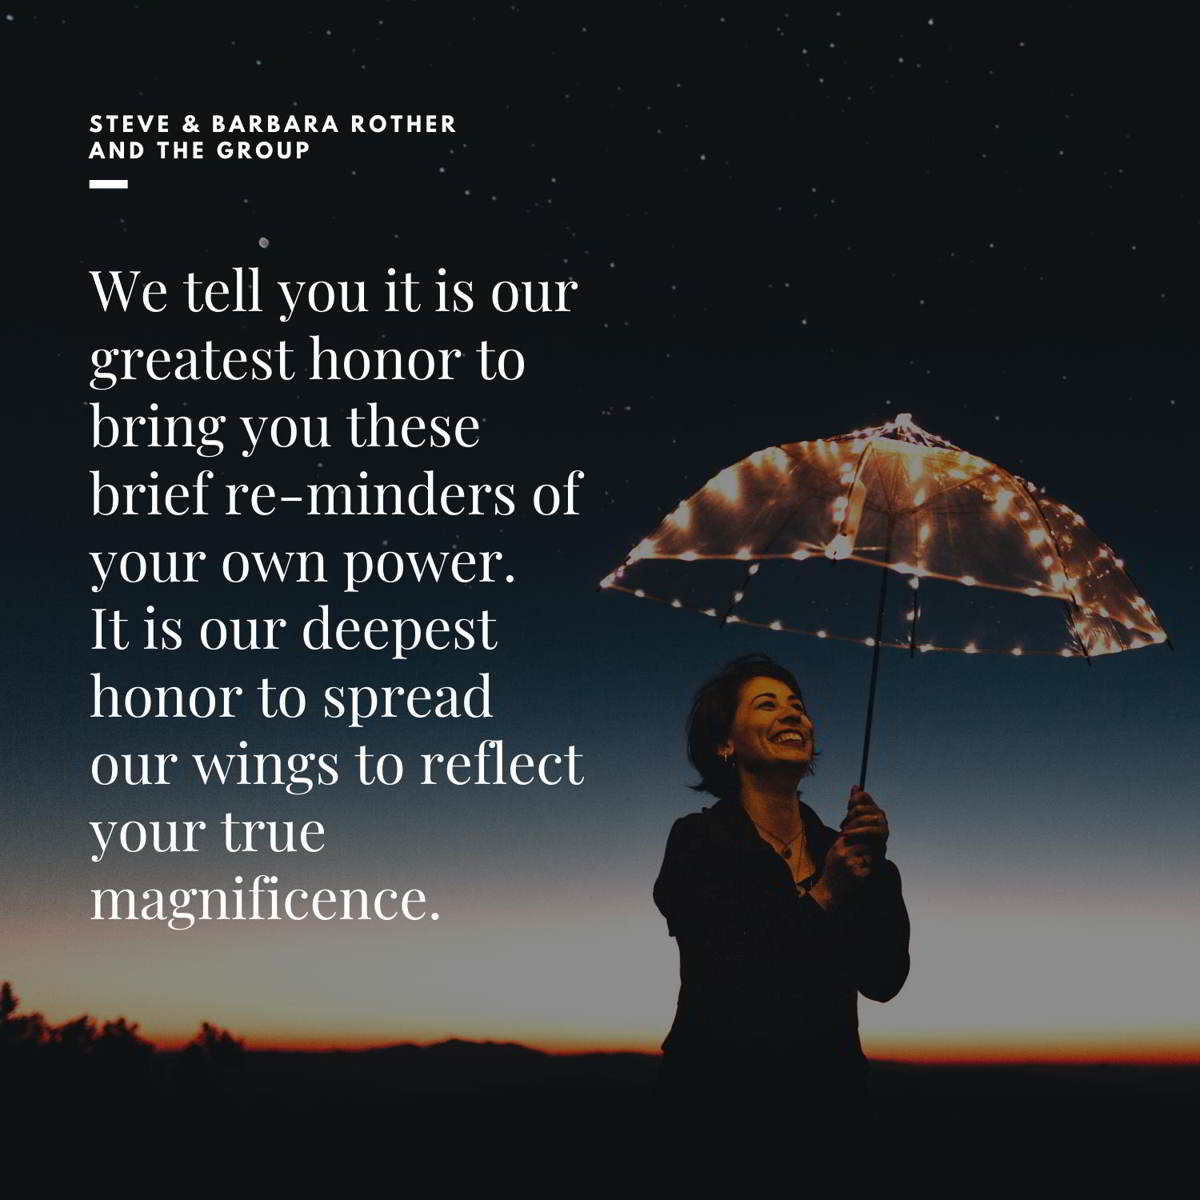 Your own power quotes